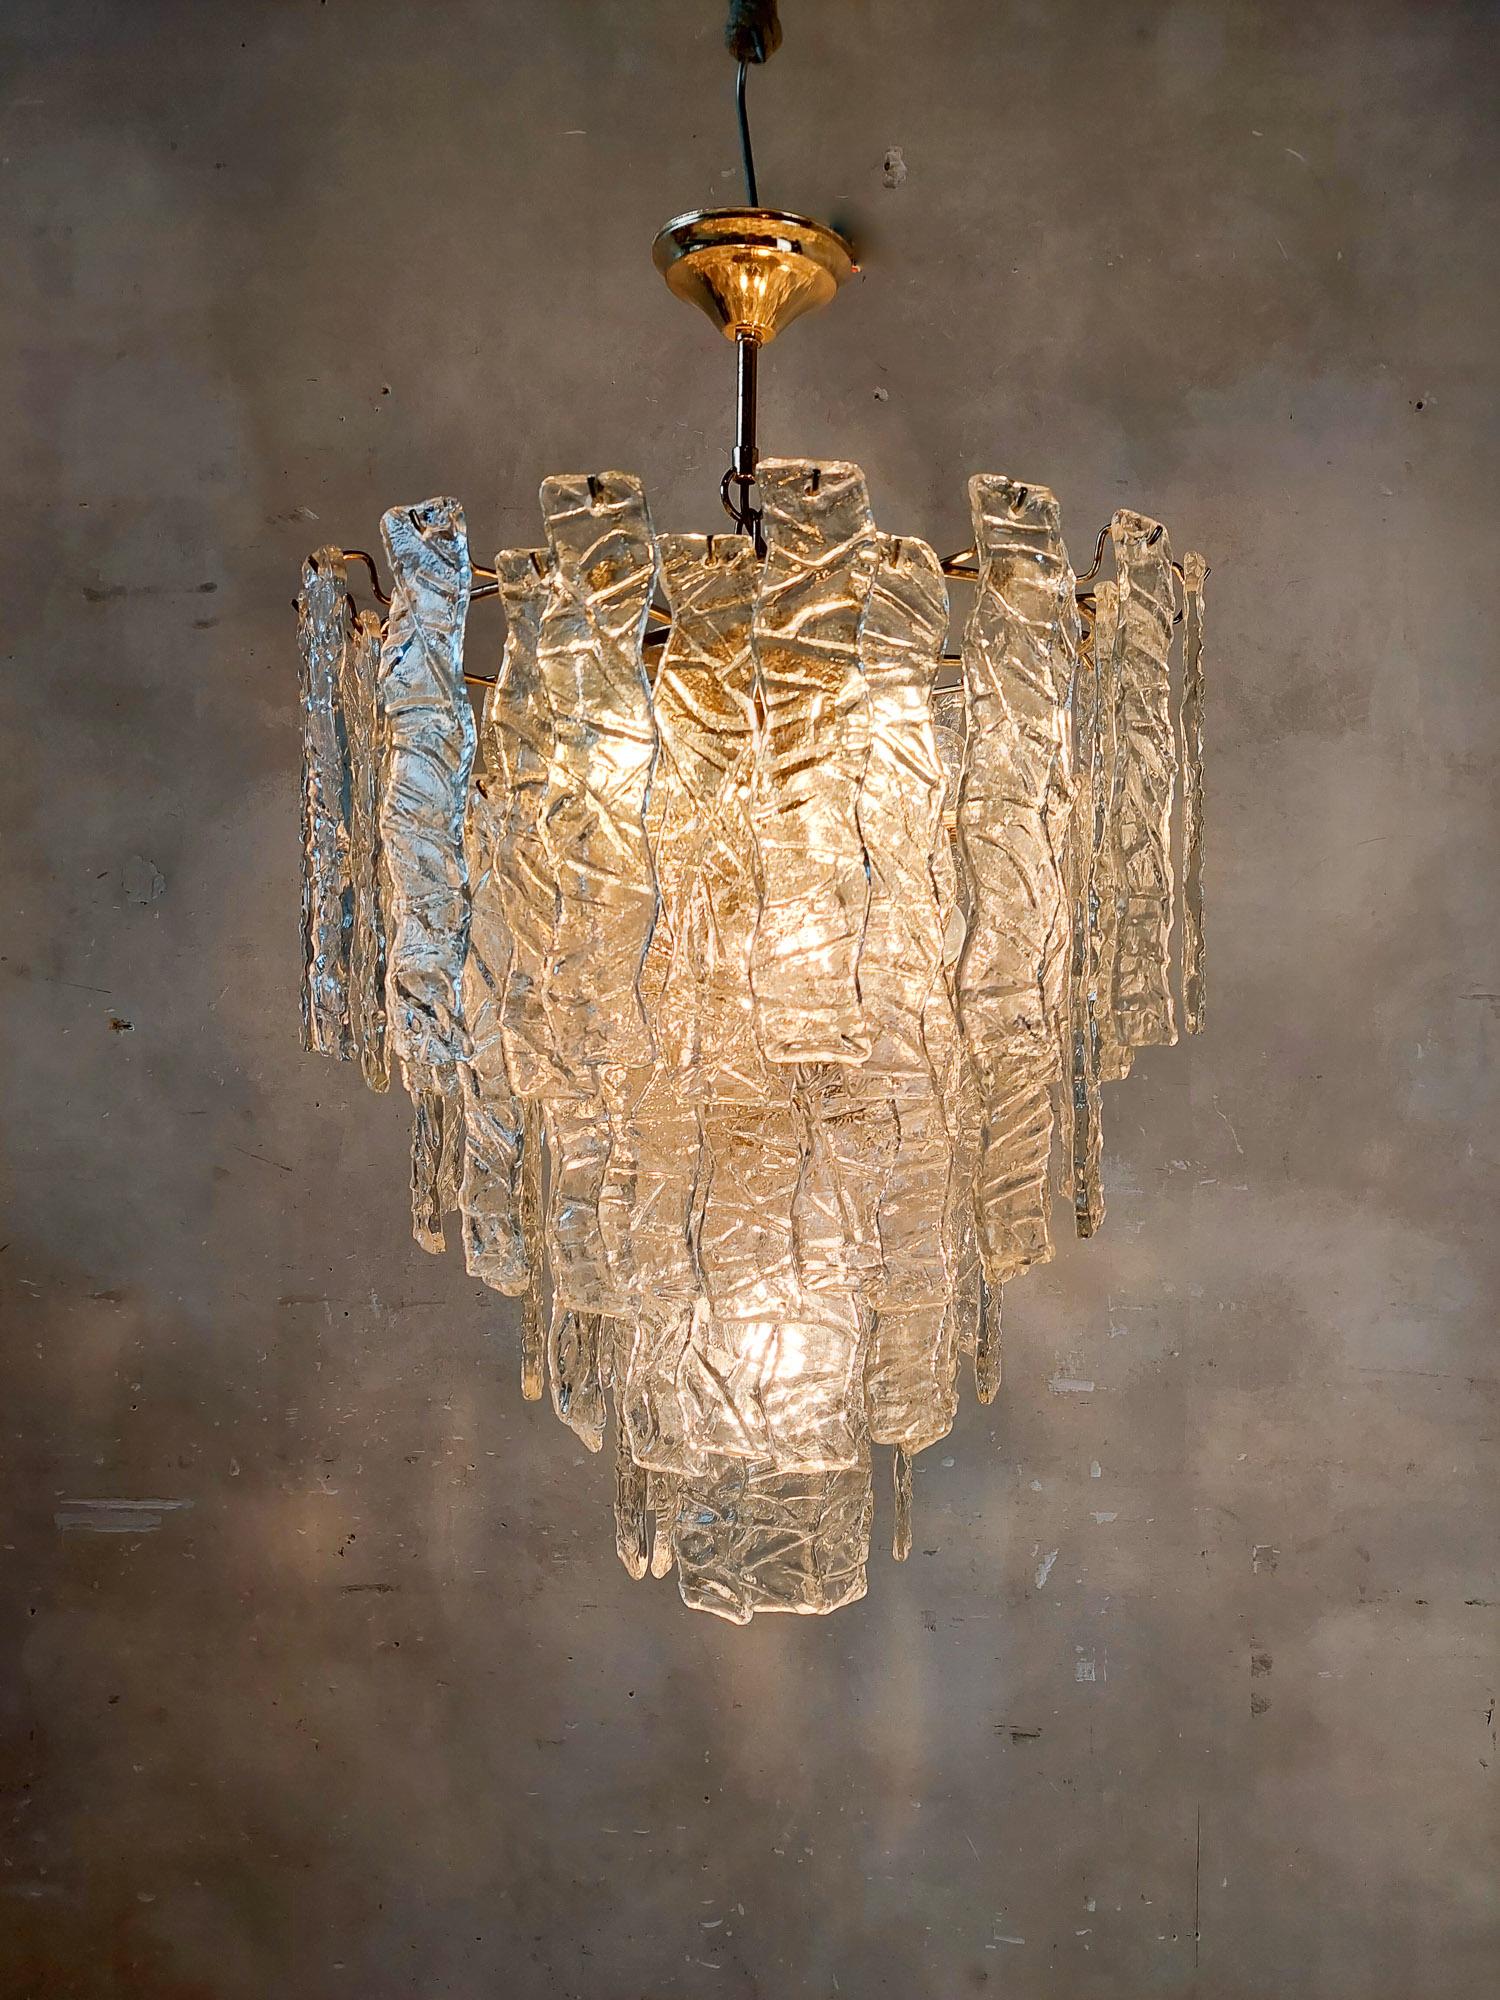 Mid-century Italian Murano glass chandelier by Paolo Venini.
This vintage hanging lamp is composed of hand-blown Murano glass icicles.
These glass icicles are hung on the frame in four levels.

Measures: height 60 cm, plus 25 cm chain and